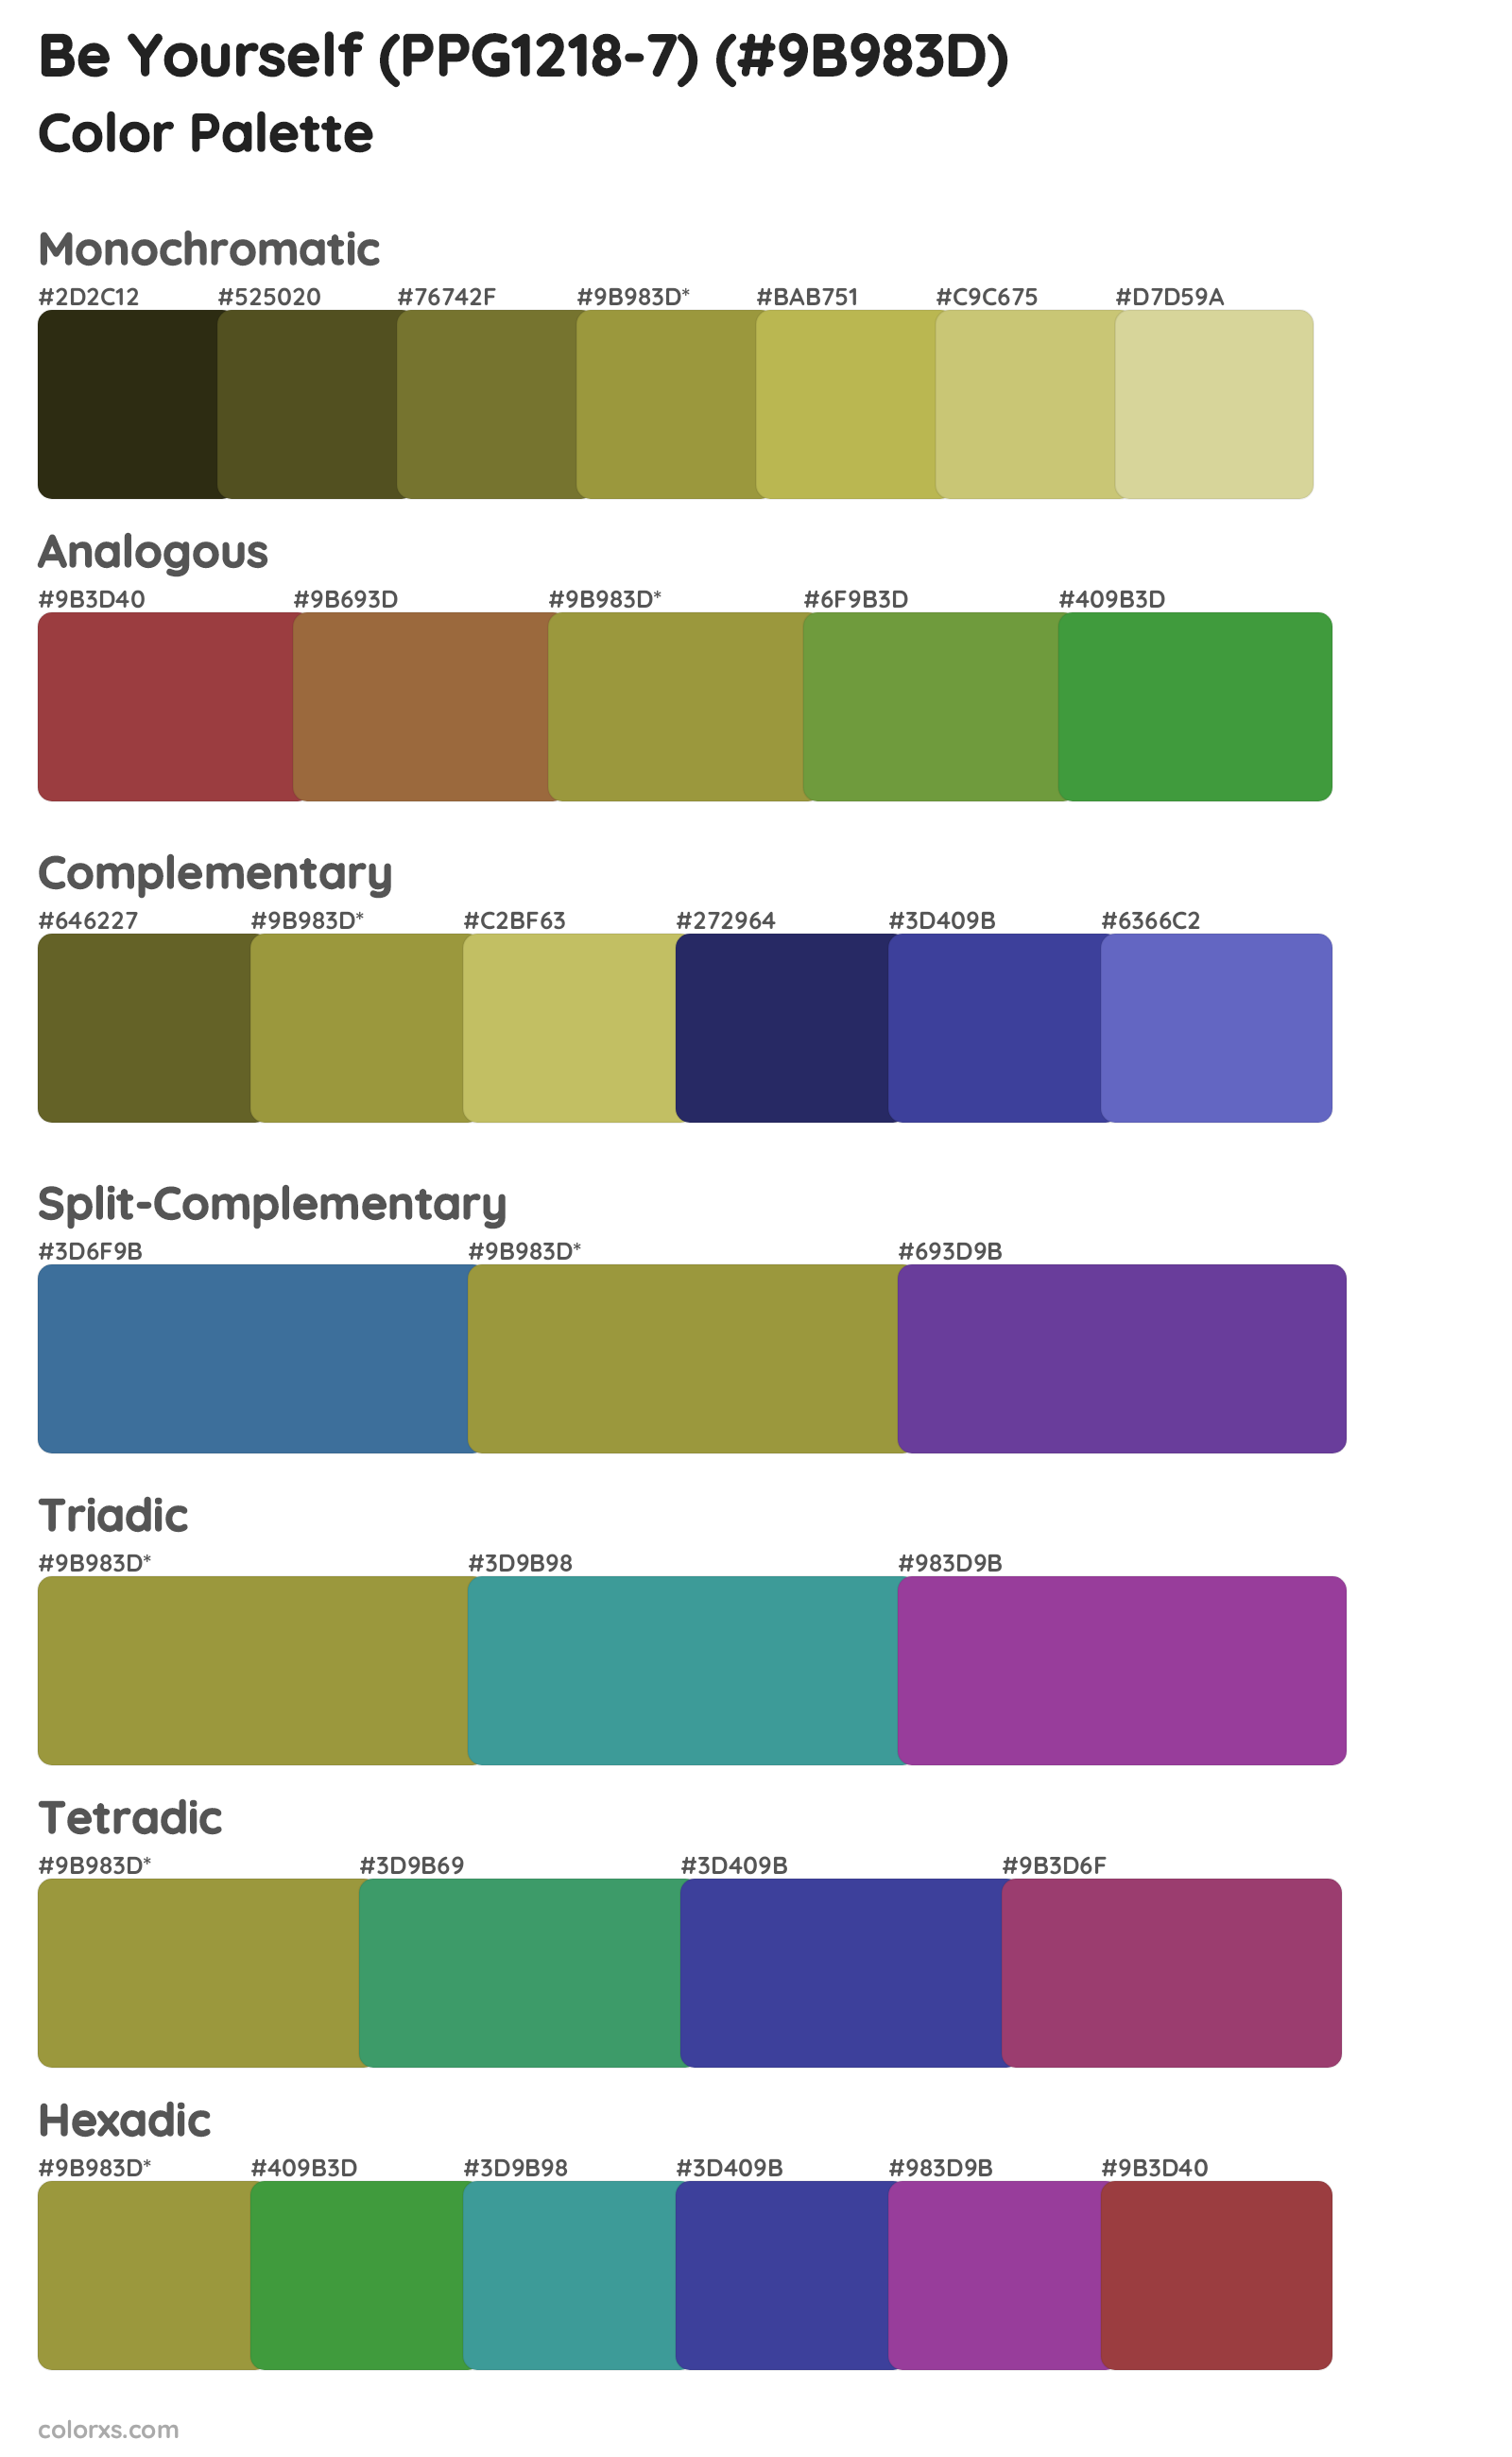 Be Yourself (PPG1218-7) Color Scheme Palettes